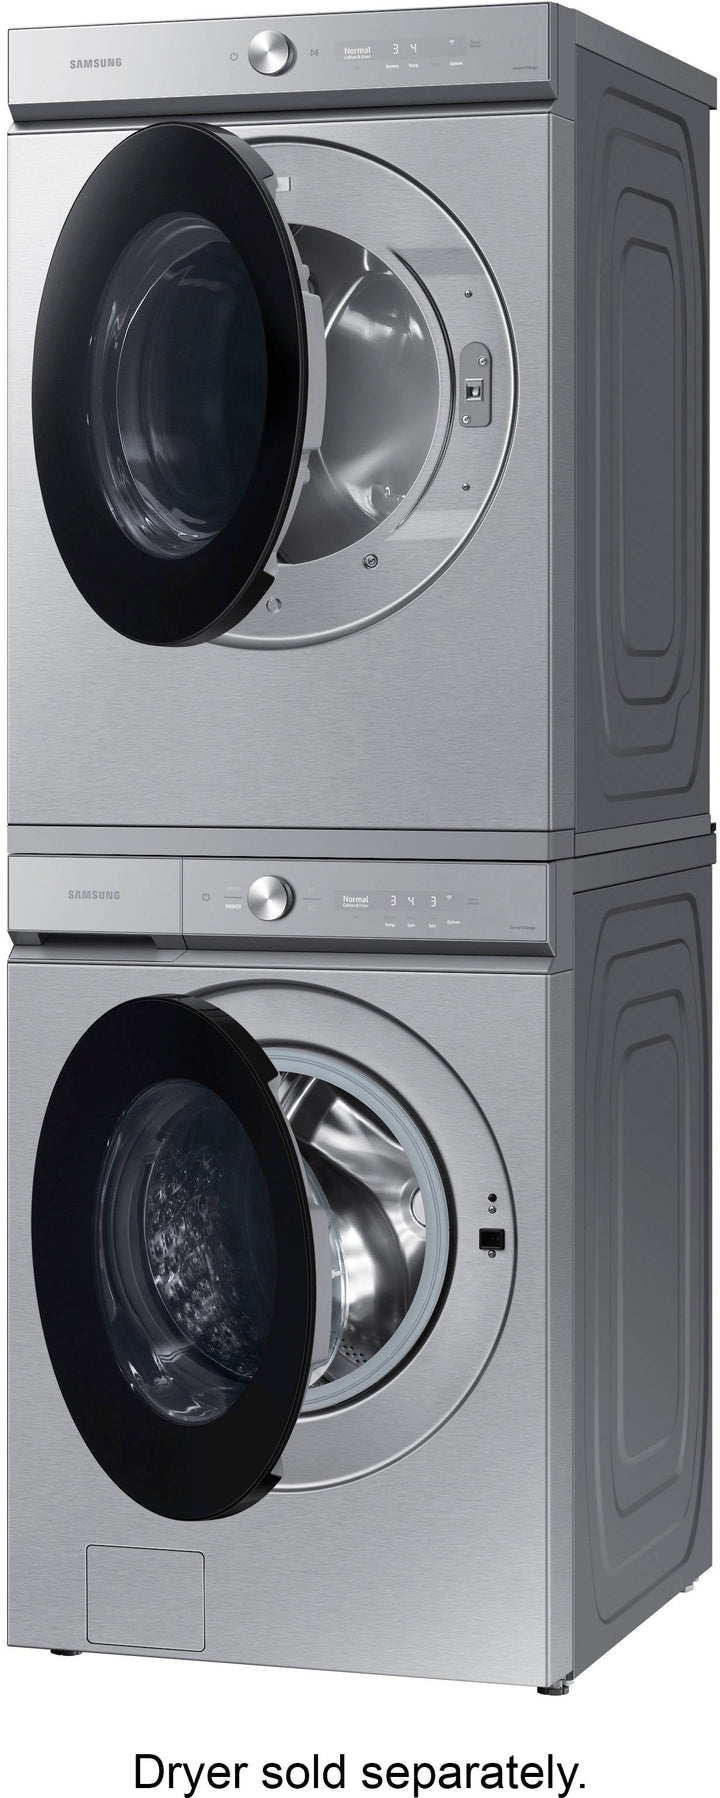 Samsung - Bespoke 5.3 cu. ft. Ultra Capacity Front Load Washer with Super Speed Wash and AI Smart Dial - Silver steel_9